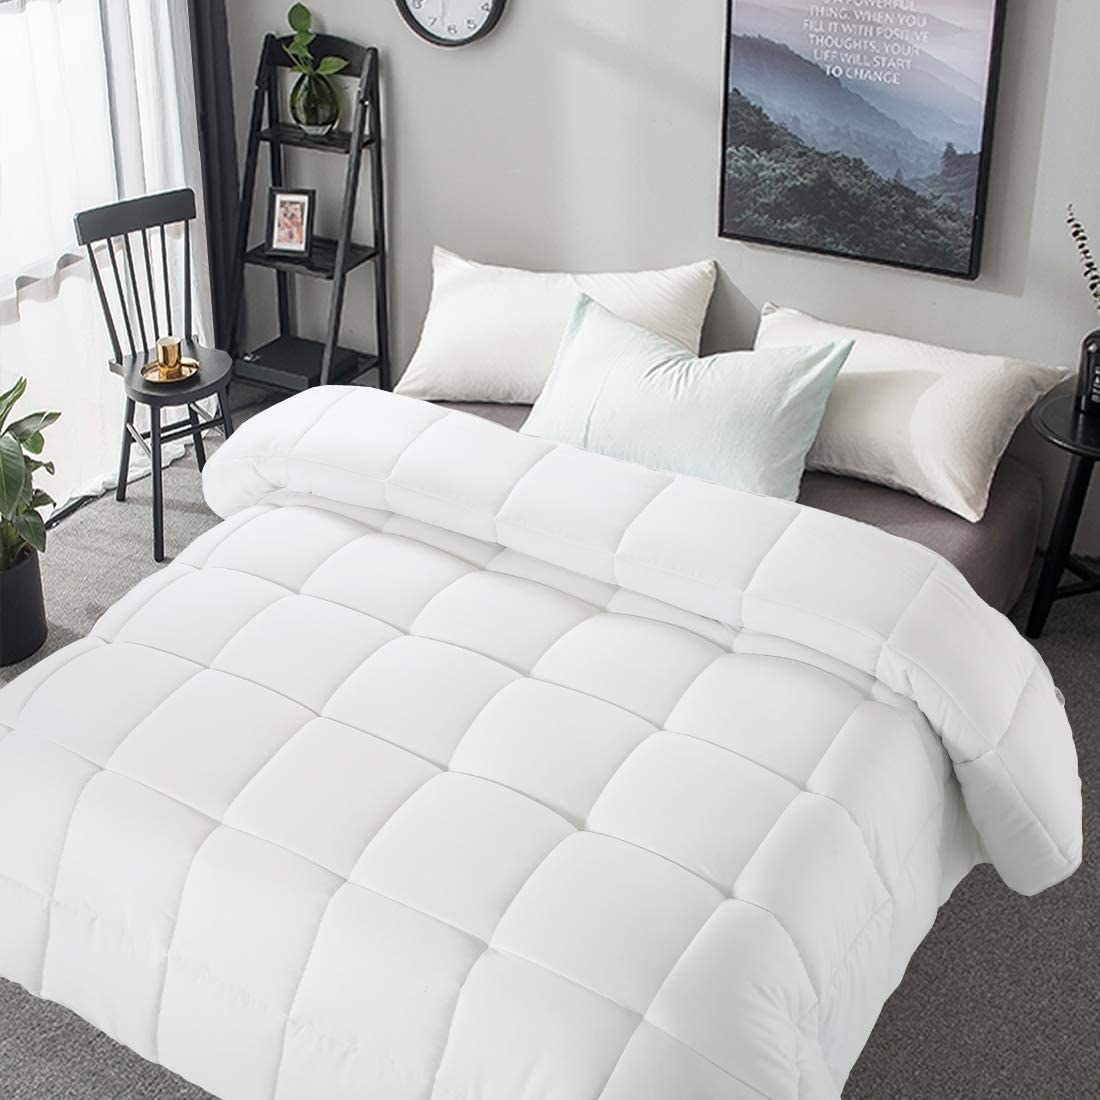 white fluffy comforter over a bed